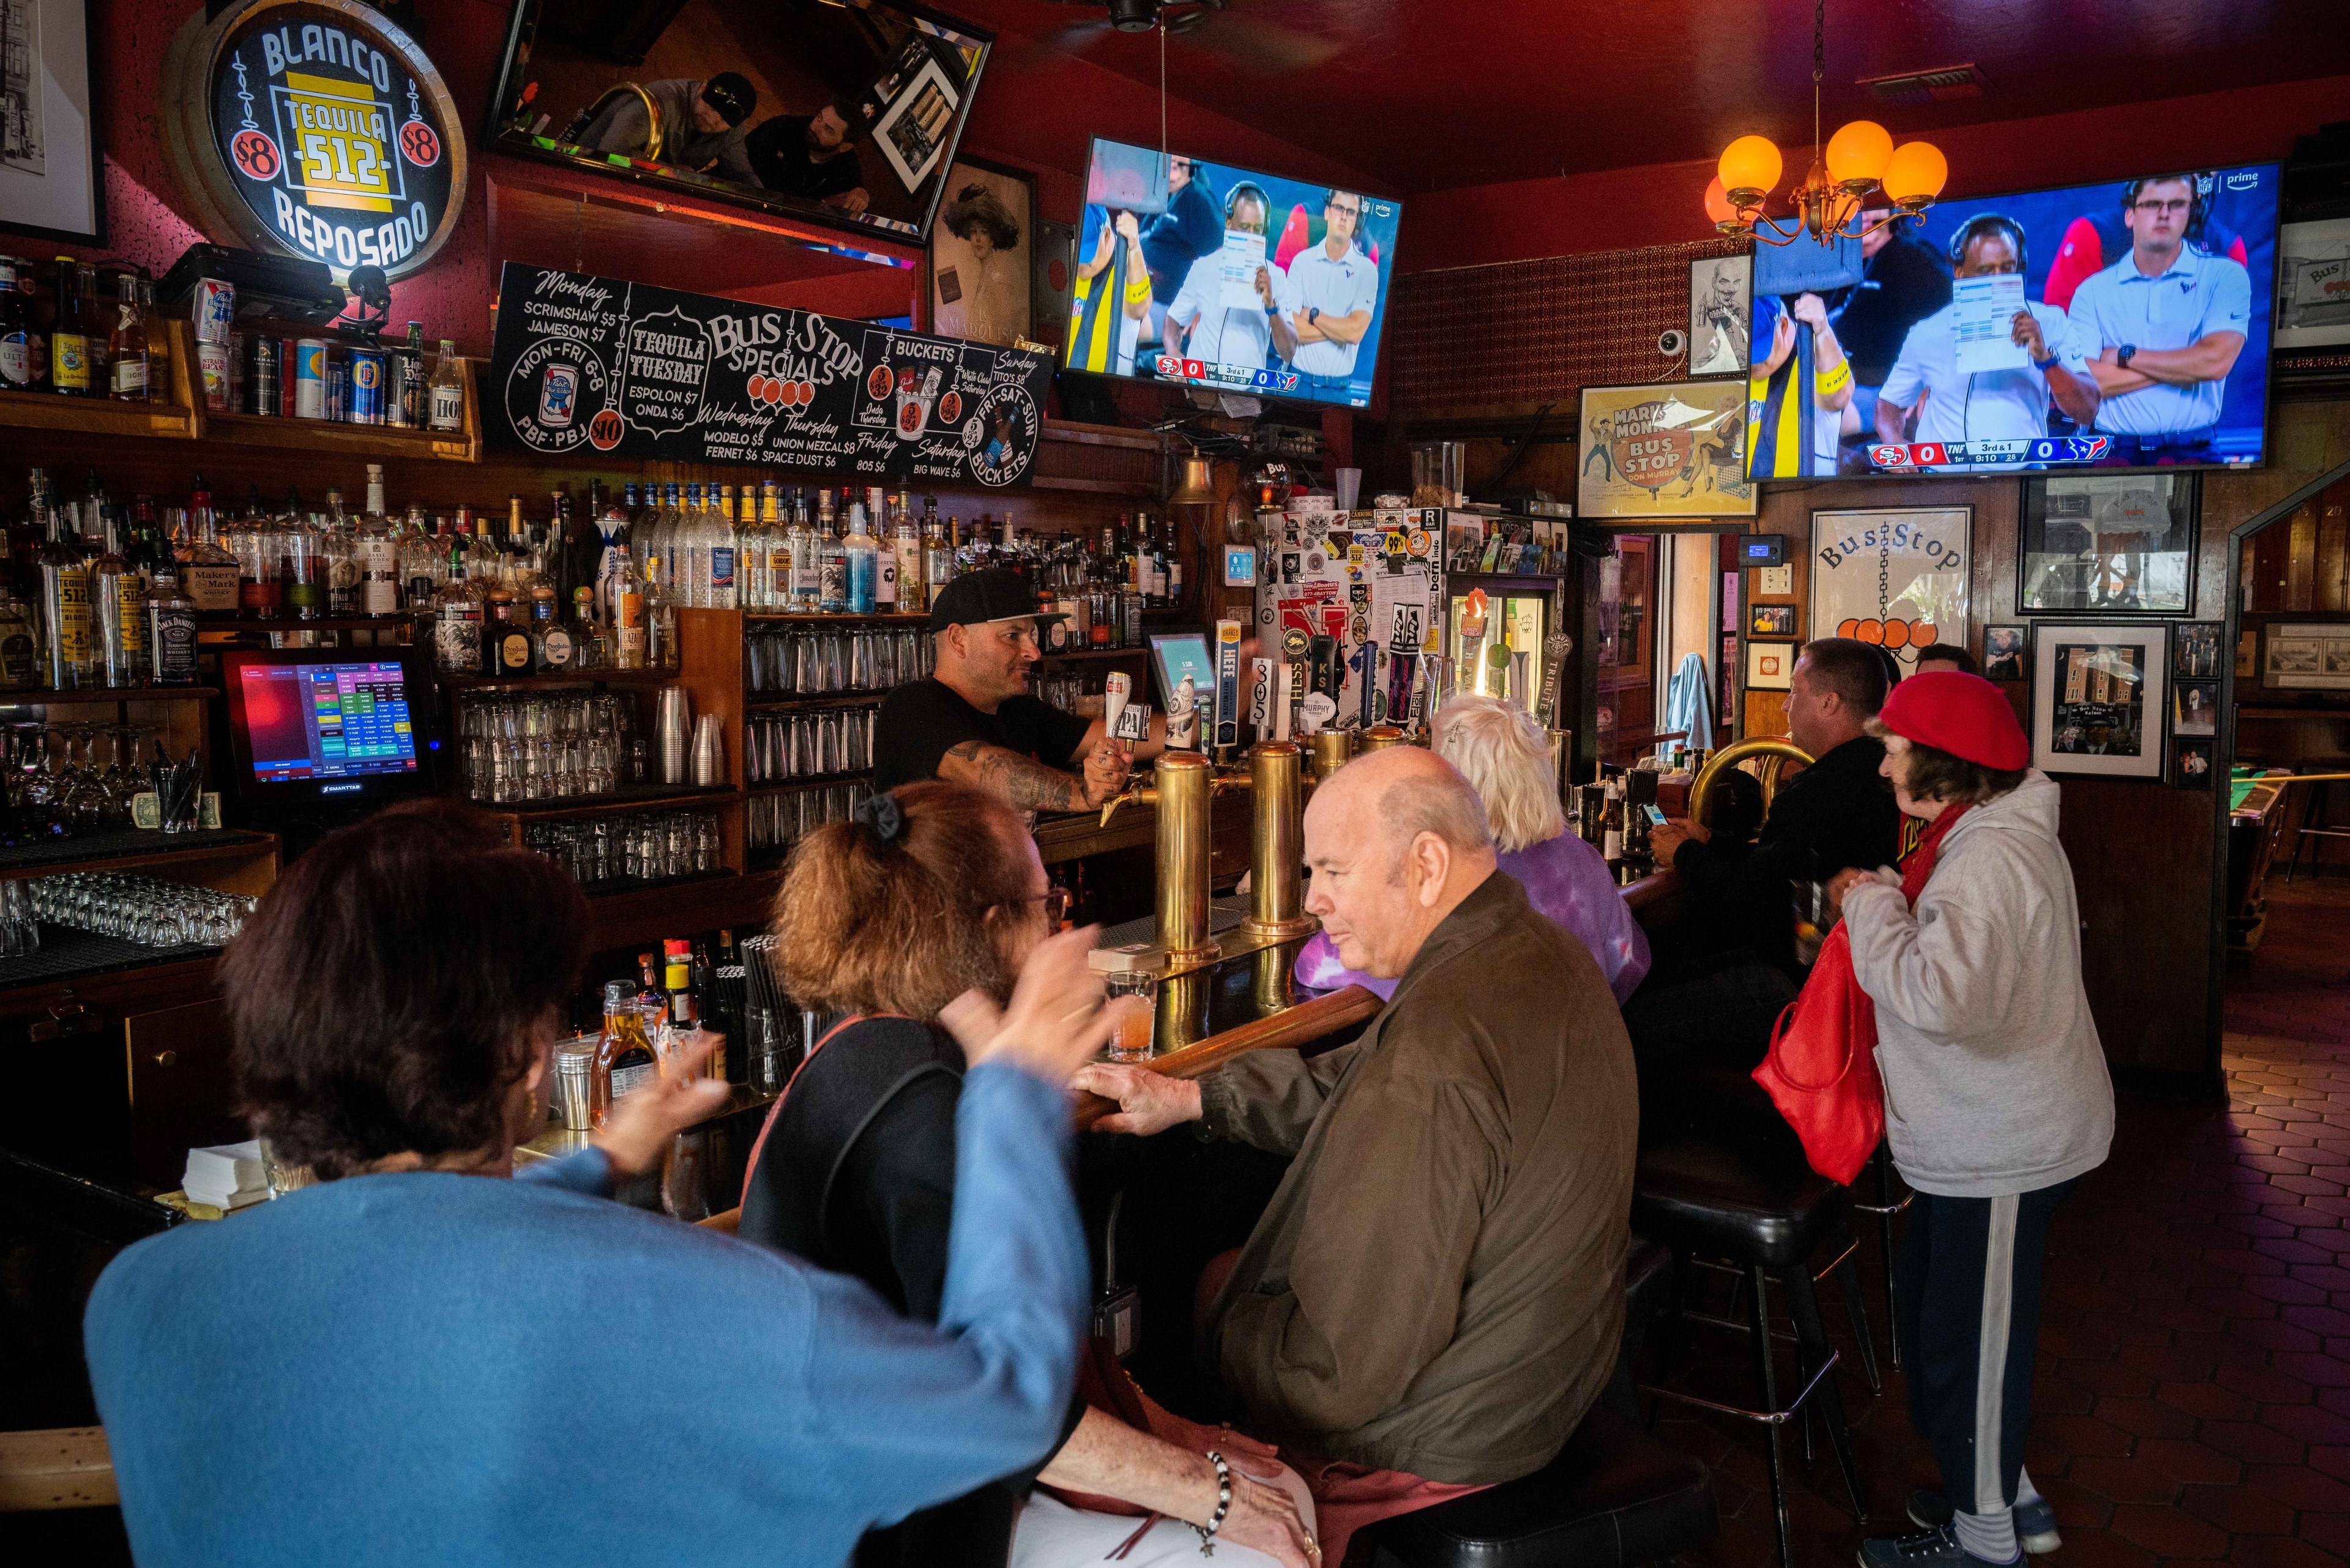 San Francisco Football Bars: Where To Watch the NFL If You Hate the 49ers